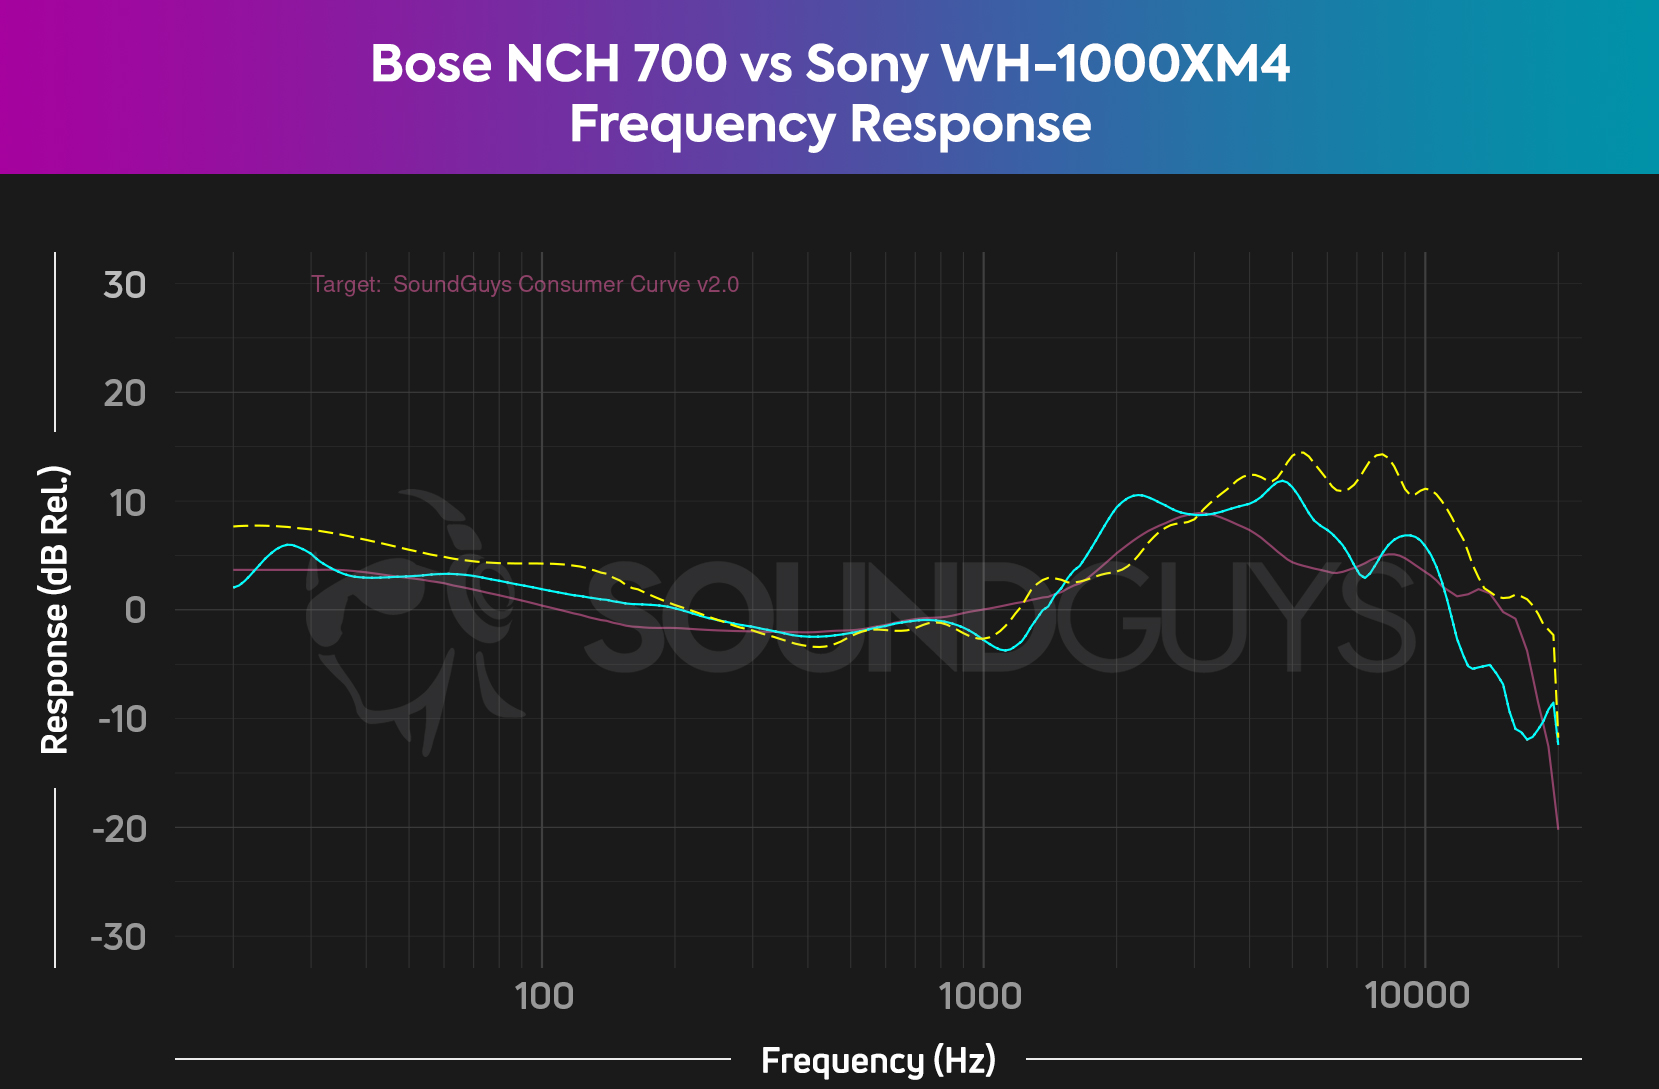 A chart compares the Bose Noise Cancelling Headphones 700 and Sony WH-1000XM4 frequency responses against the SoundGuys Consumer Curve V2, revealing that the Sony headset has a more bass-heavy sound.